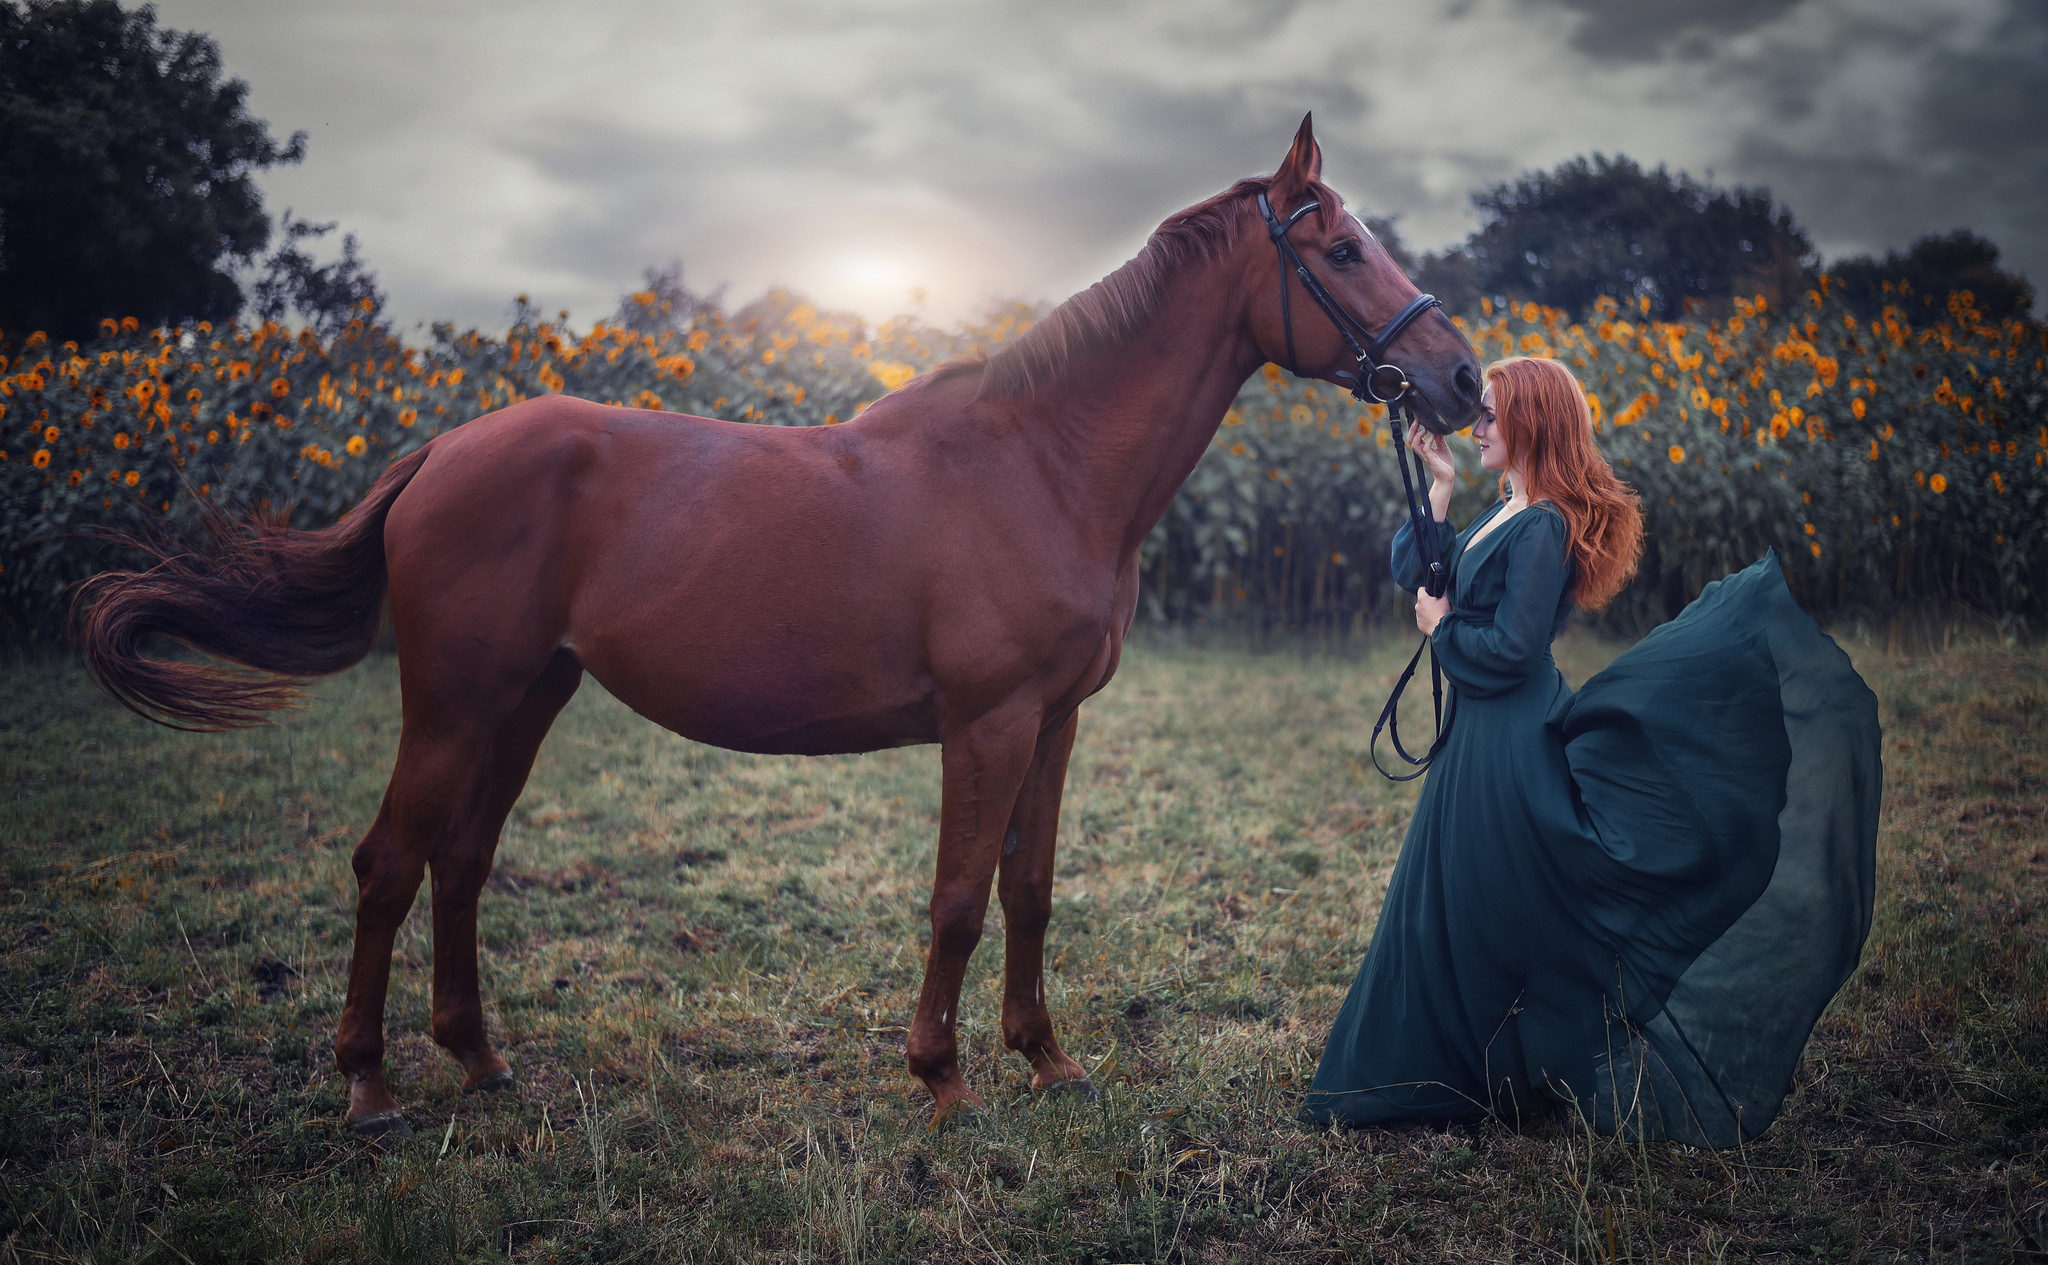 People 2048x1265 model women outdoors redhead sunflowers horse dress smiling profile women with horse depth of field field side view animals women